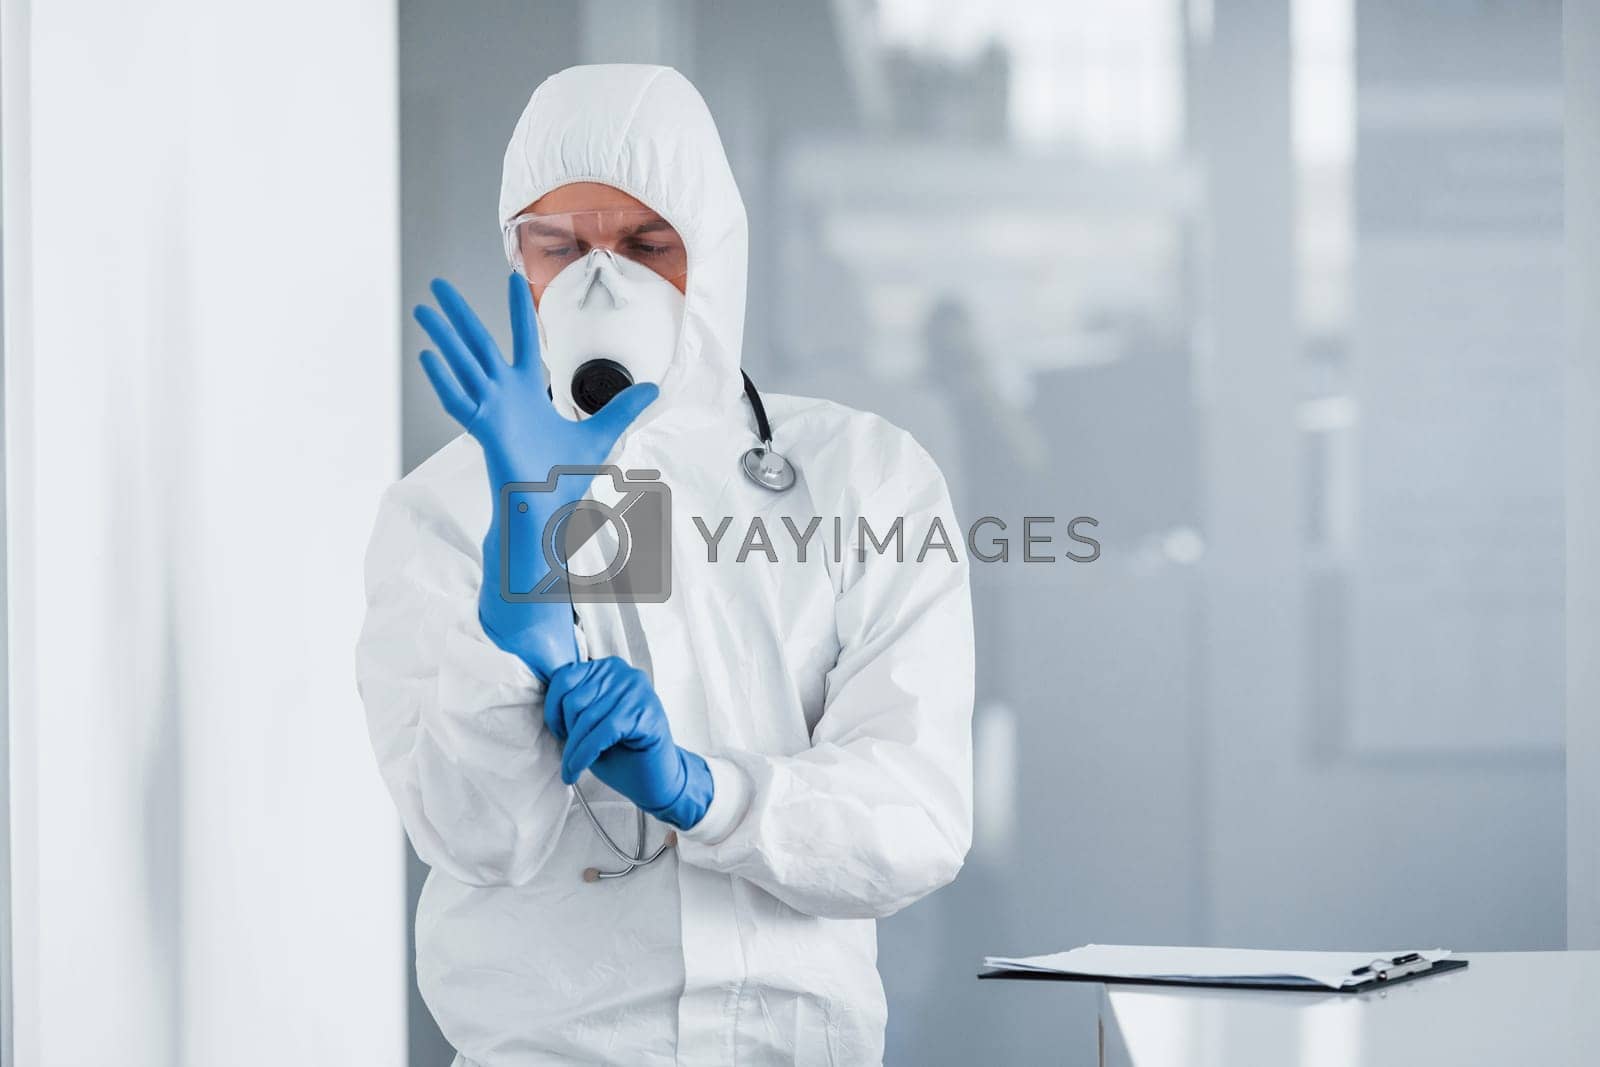 Royalty free image of Male doctor scientist in lab coat, defensive eyewear and mask wearing blue gloves by Standret